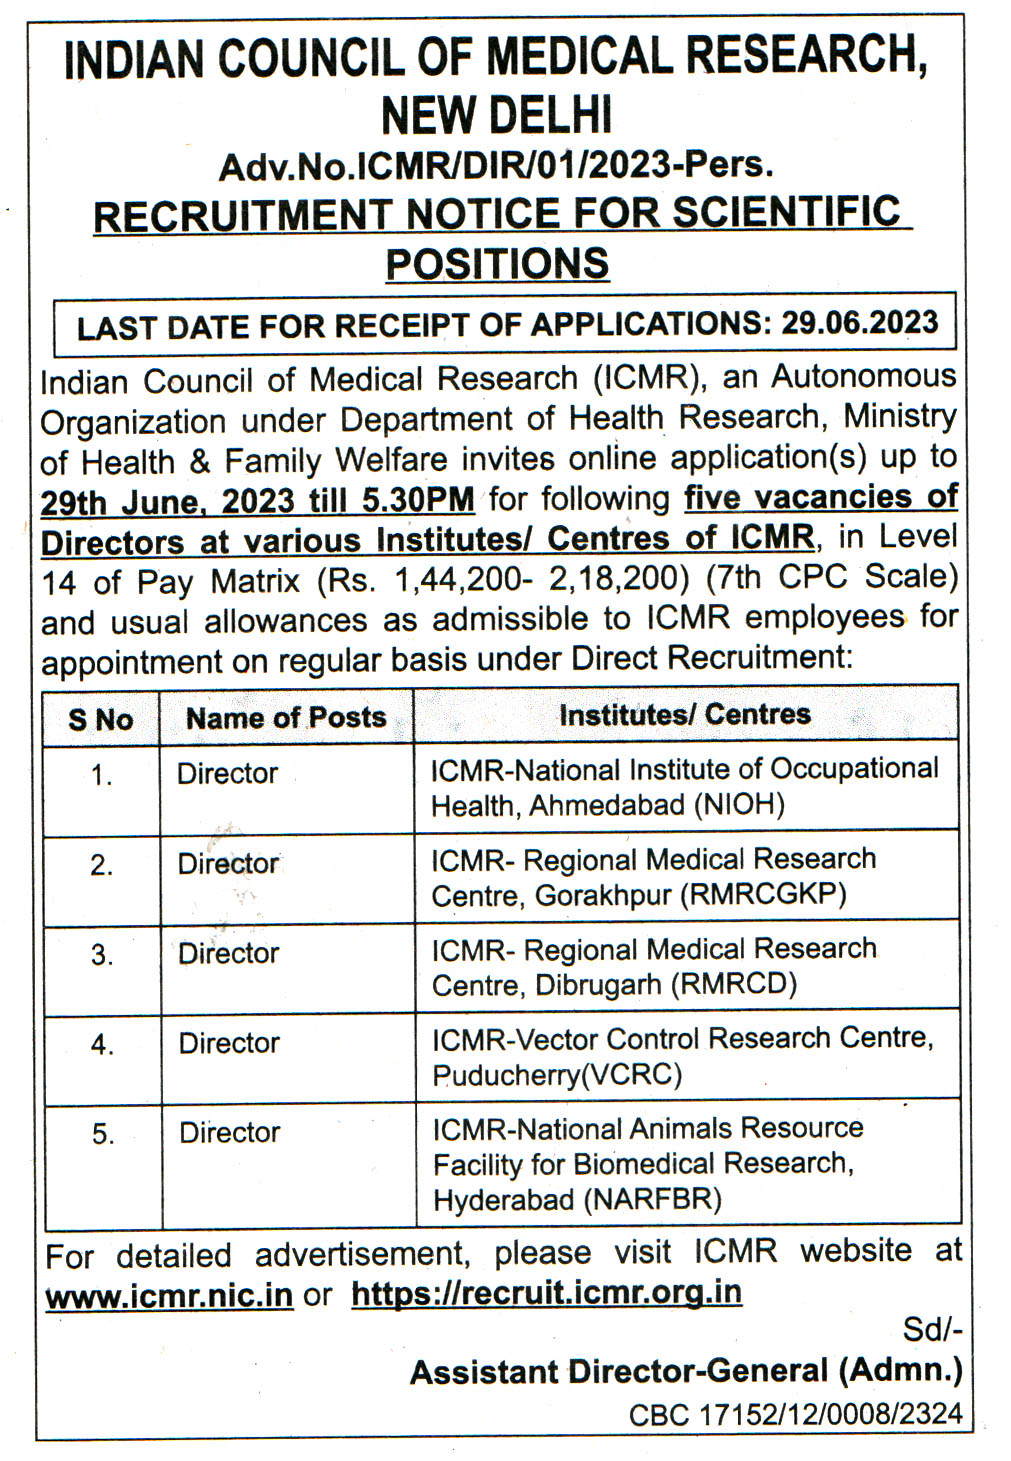 Government Jobs Indian Council of Medical Research (ICMR) New Delhi Recruitment